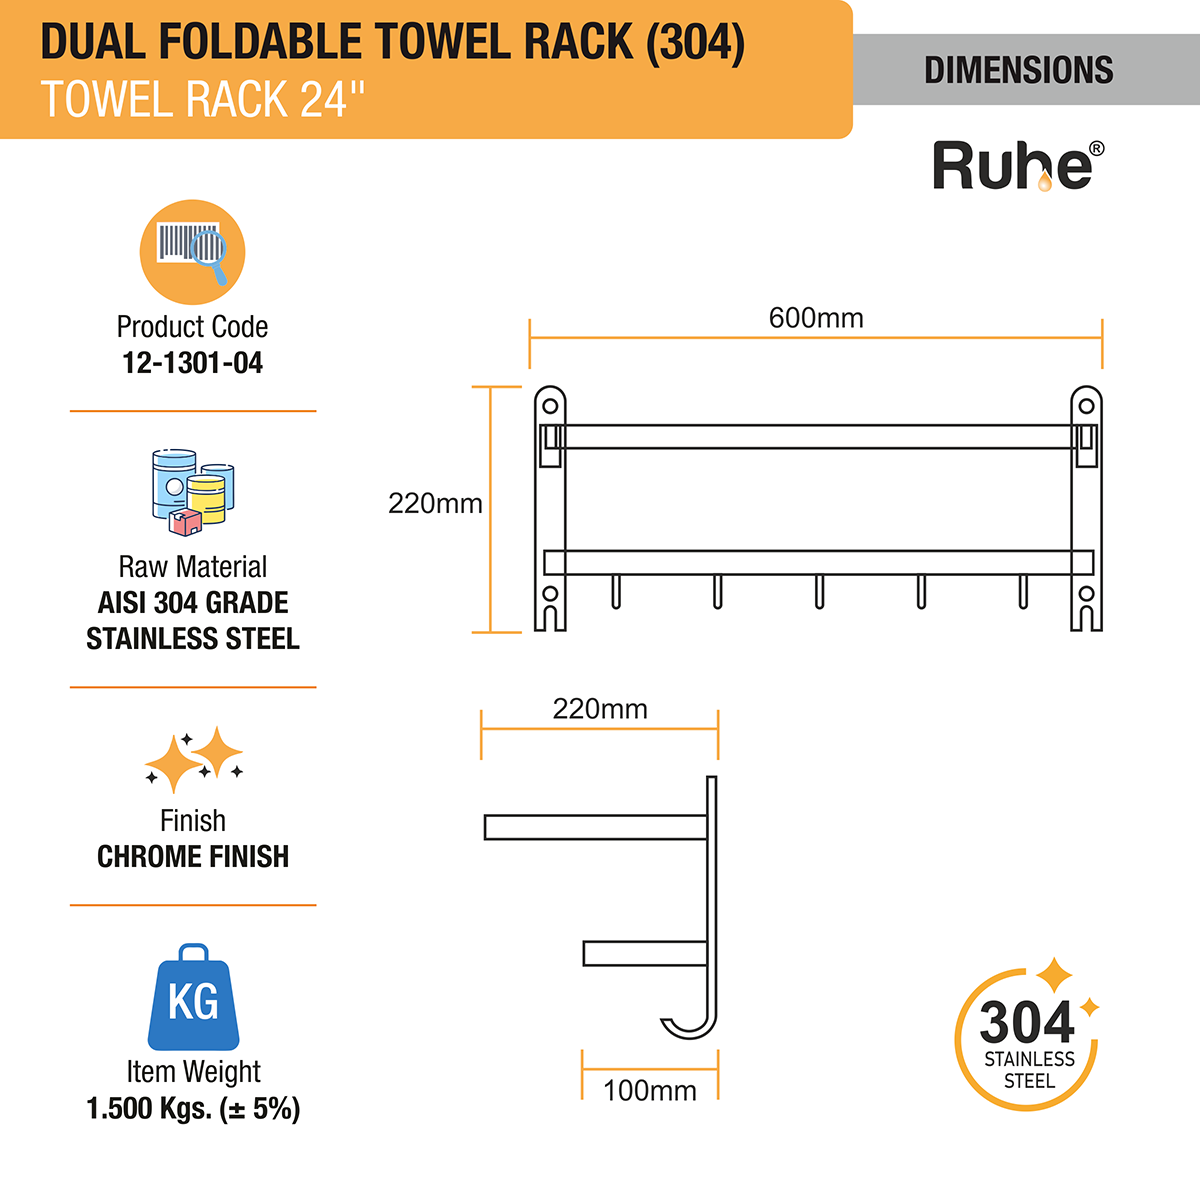 Dual Foldable 304-Grade Towel Rack (24 Inches) dimensions and sizes